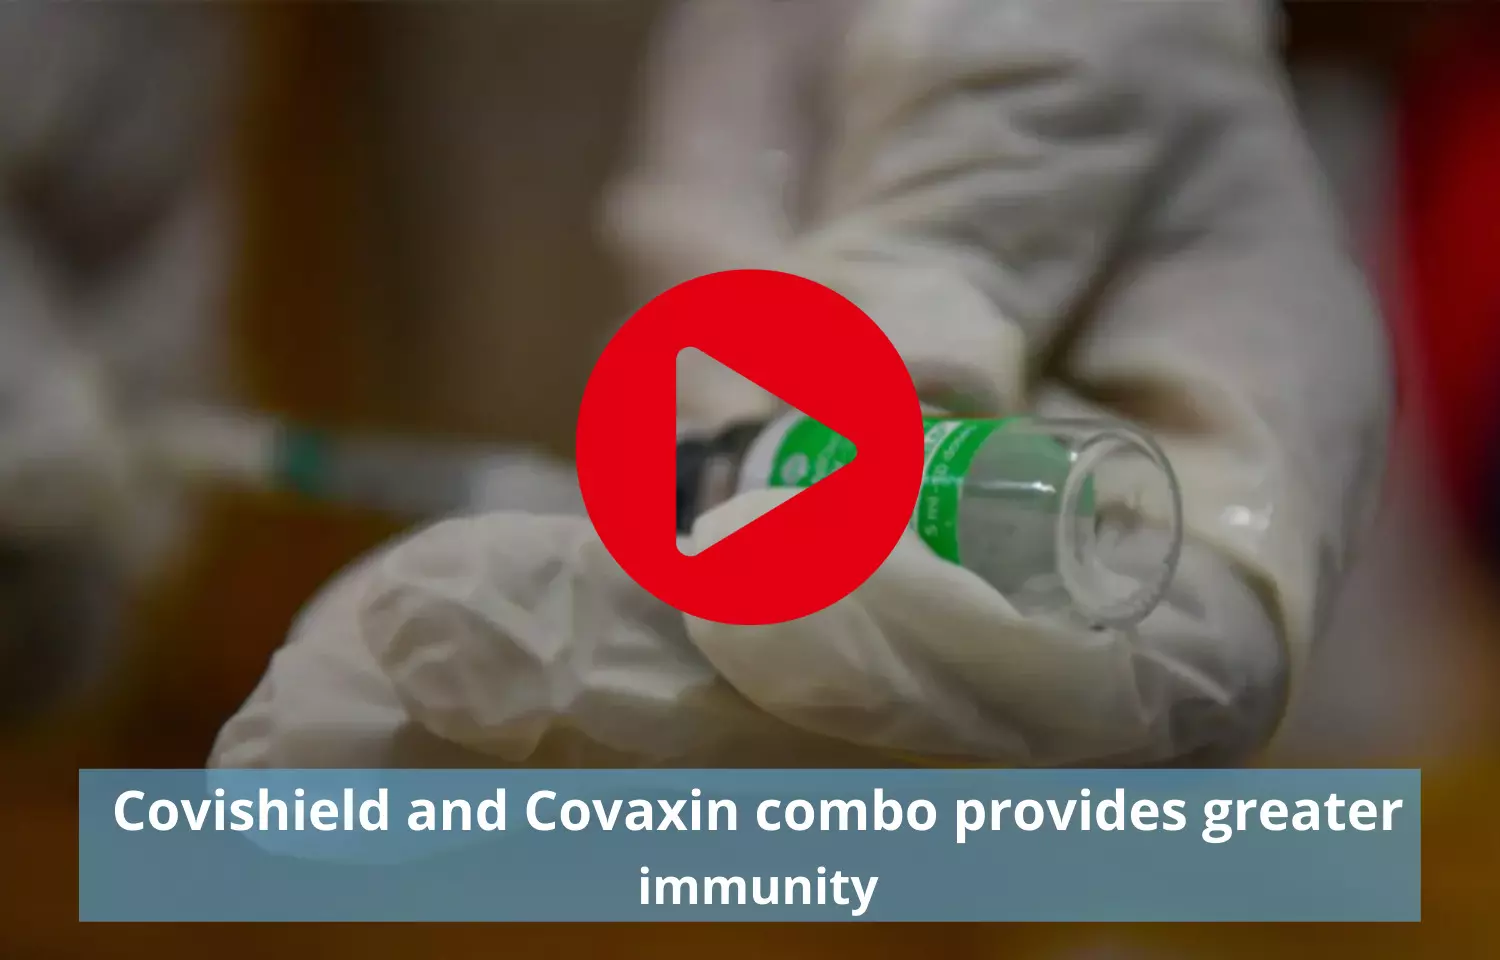 Covishield and Covaxin combo has much greater immunity